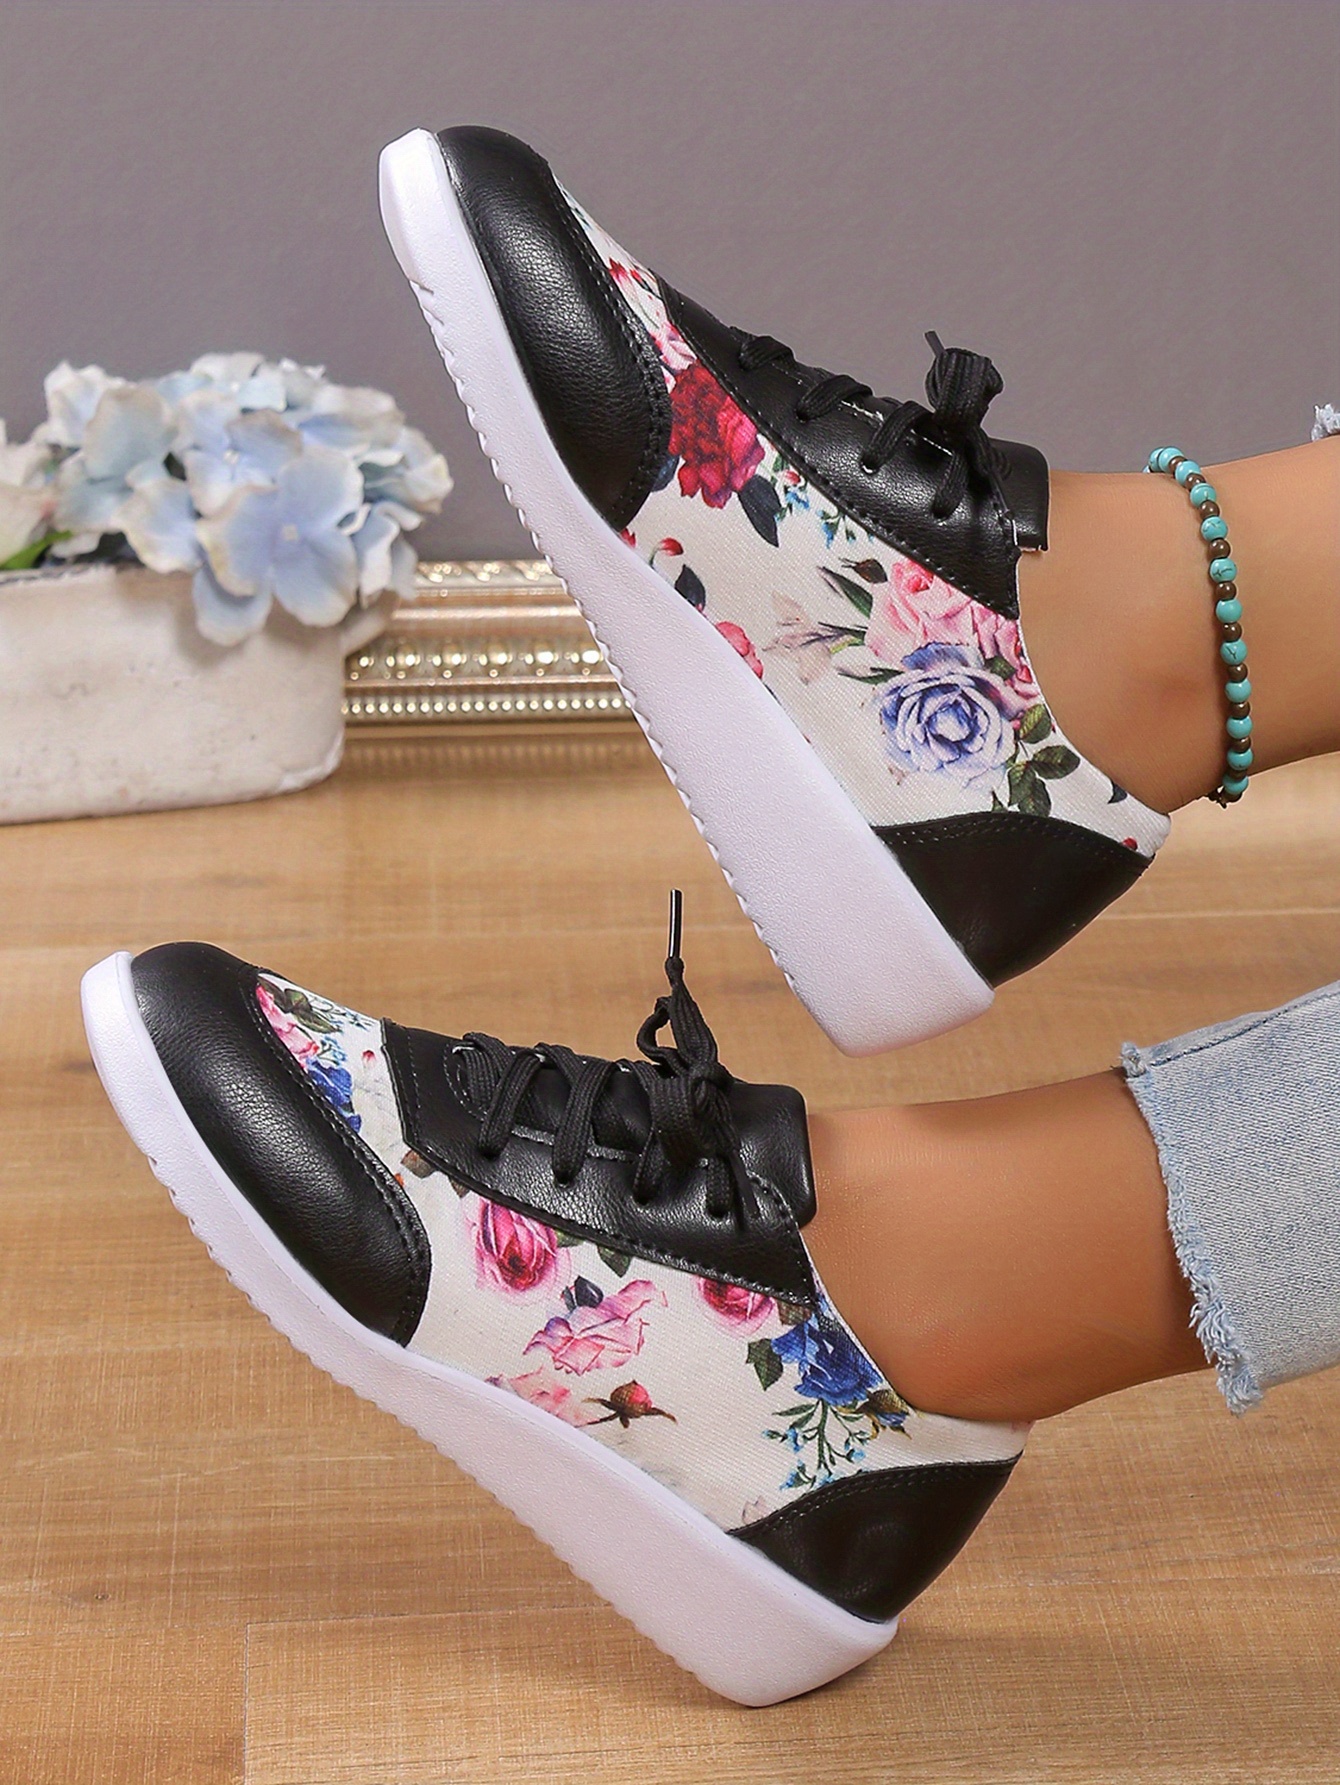 womens floral print sneakers lace up low top round toe non slip outdoor lightweight trainers casual versatile shoes details 5